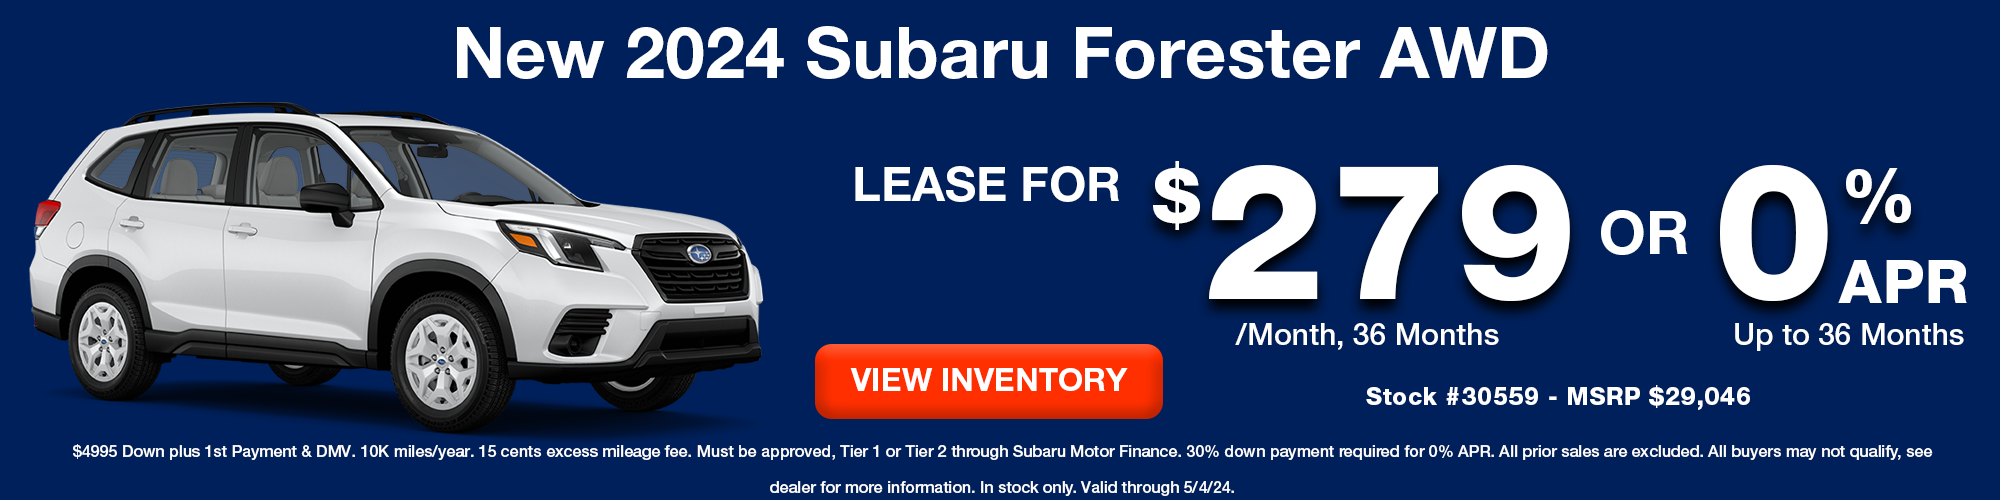 New 2024 Subaru Forester Lease